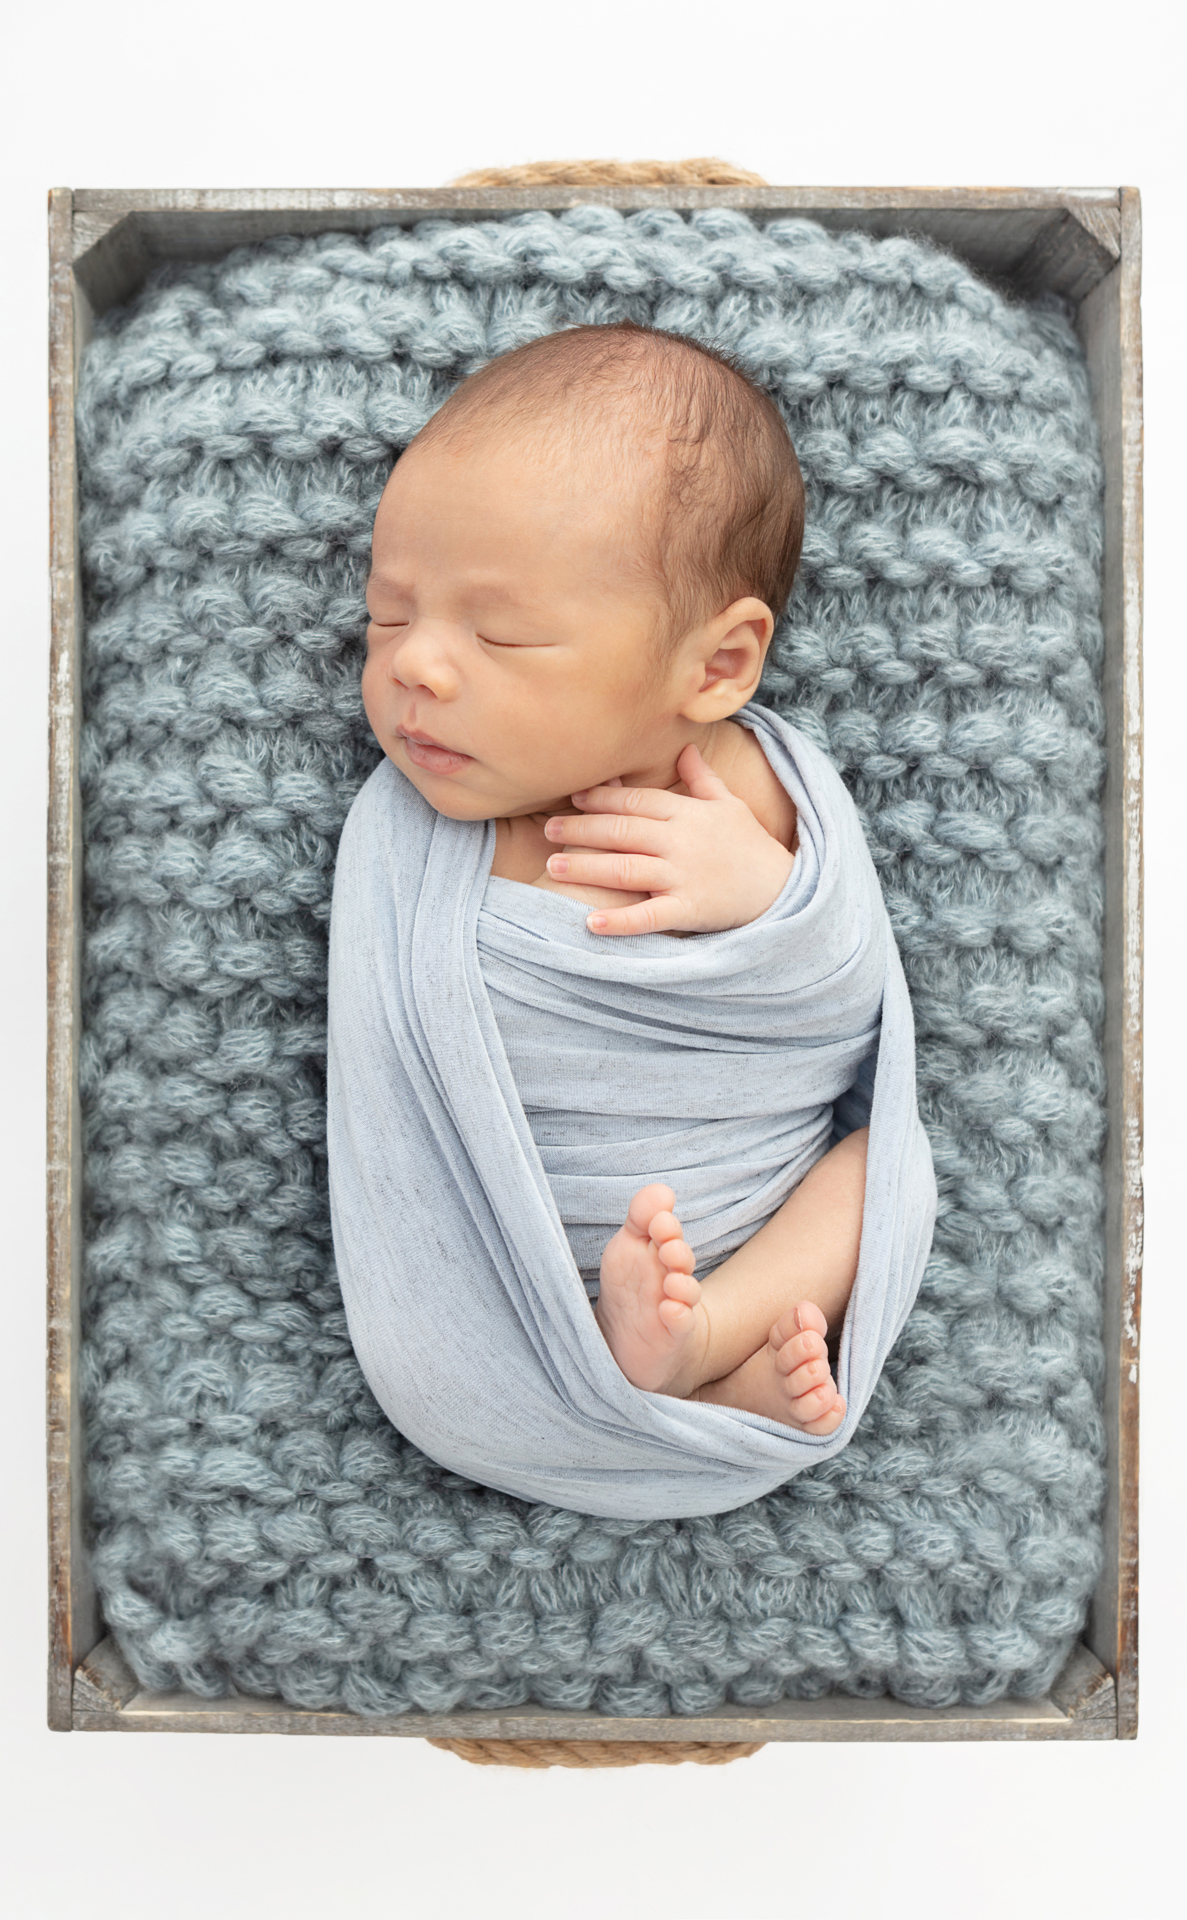 baby boy wrapped in dusty blue, asleep on a chunky knit blanket folded in a rustic box